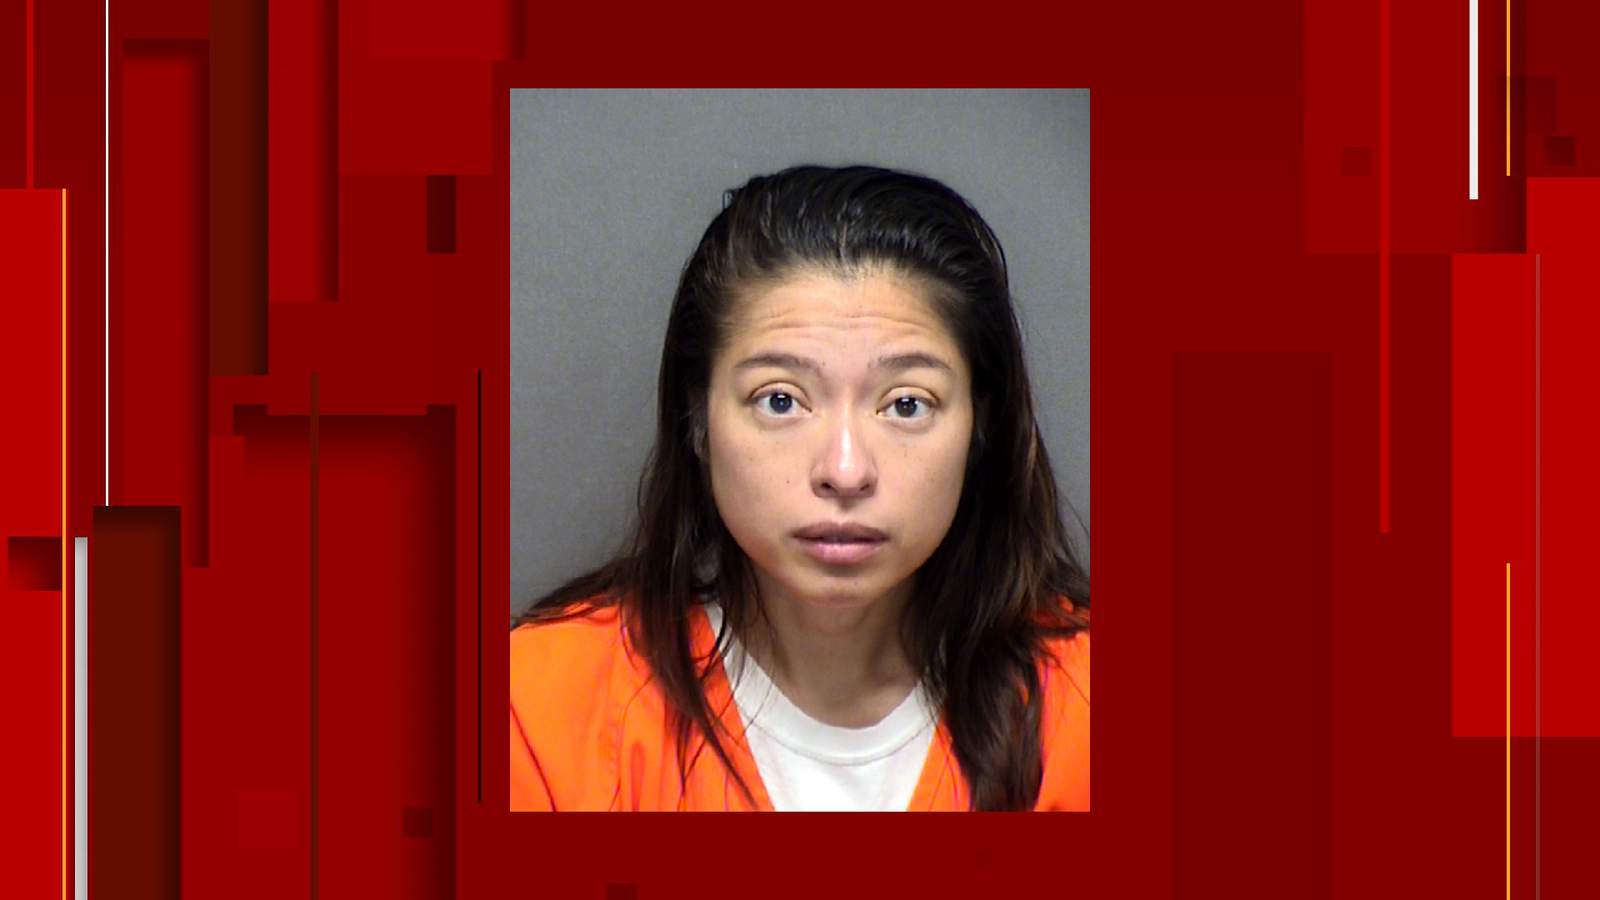 Leon Valley police say woman accused of fatally hitting man on sidewalk was his relative